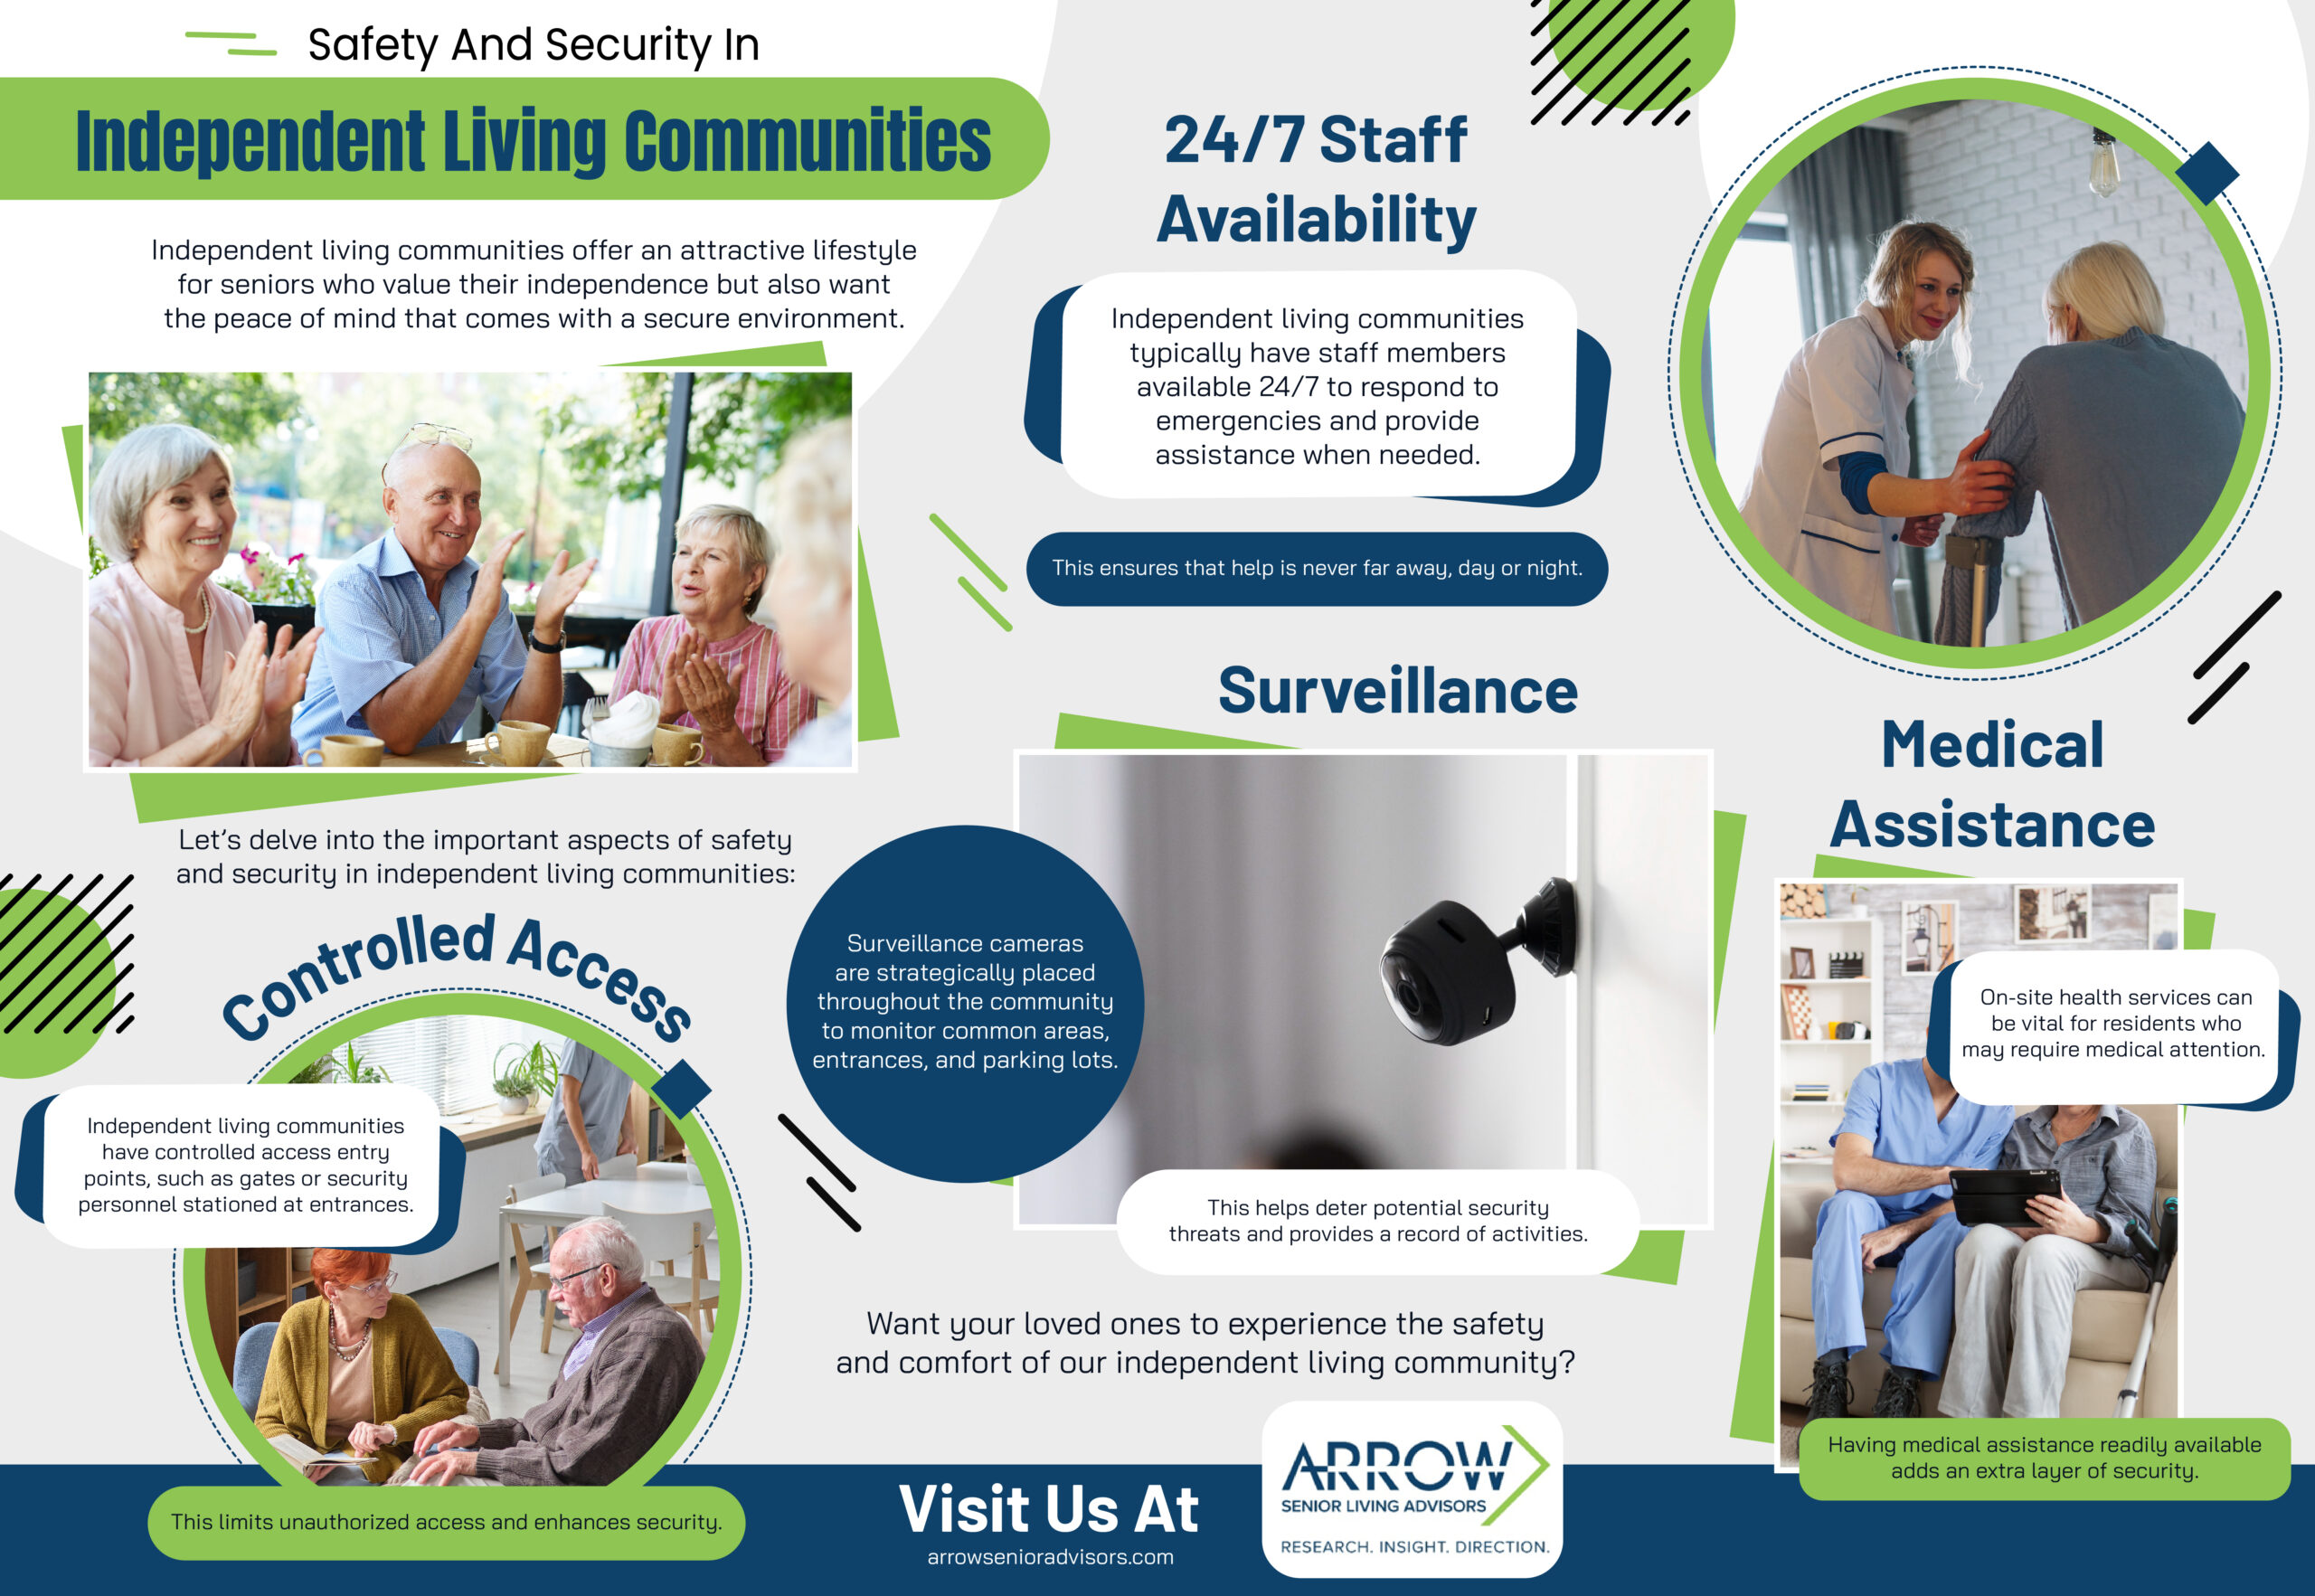 Safety and Security in Independent Living Communities